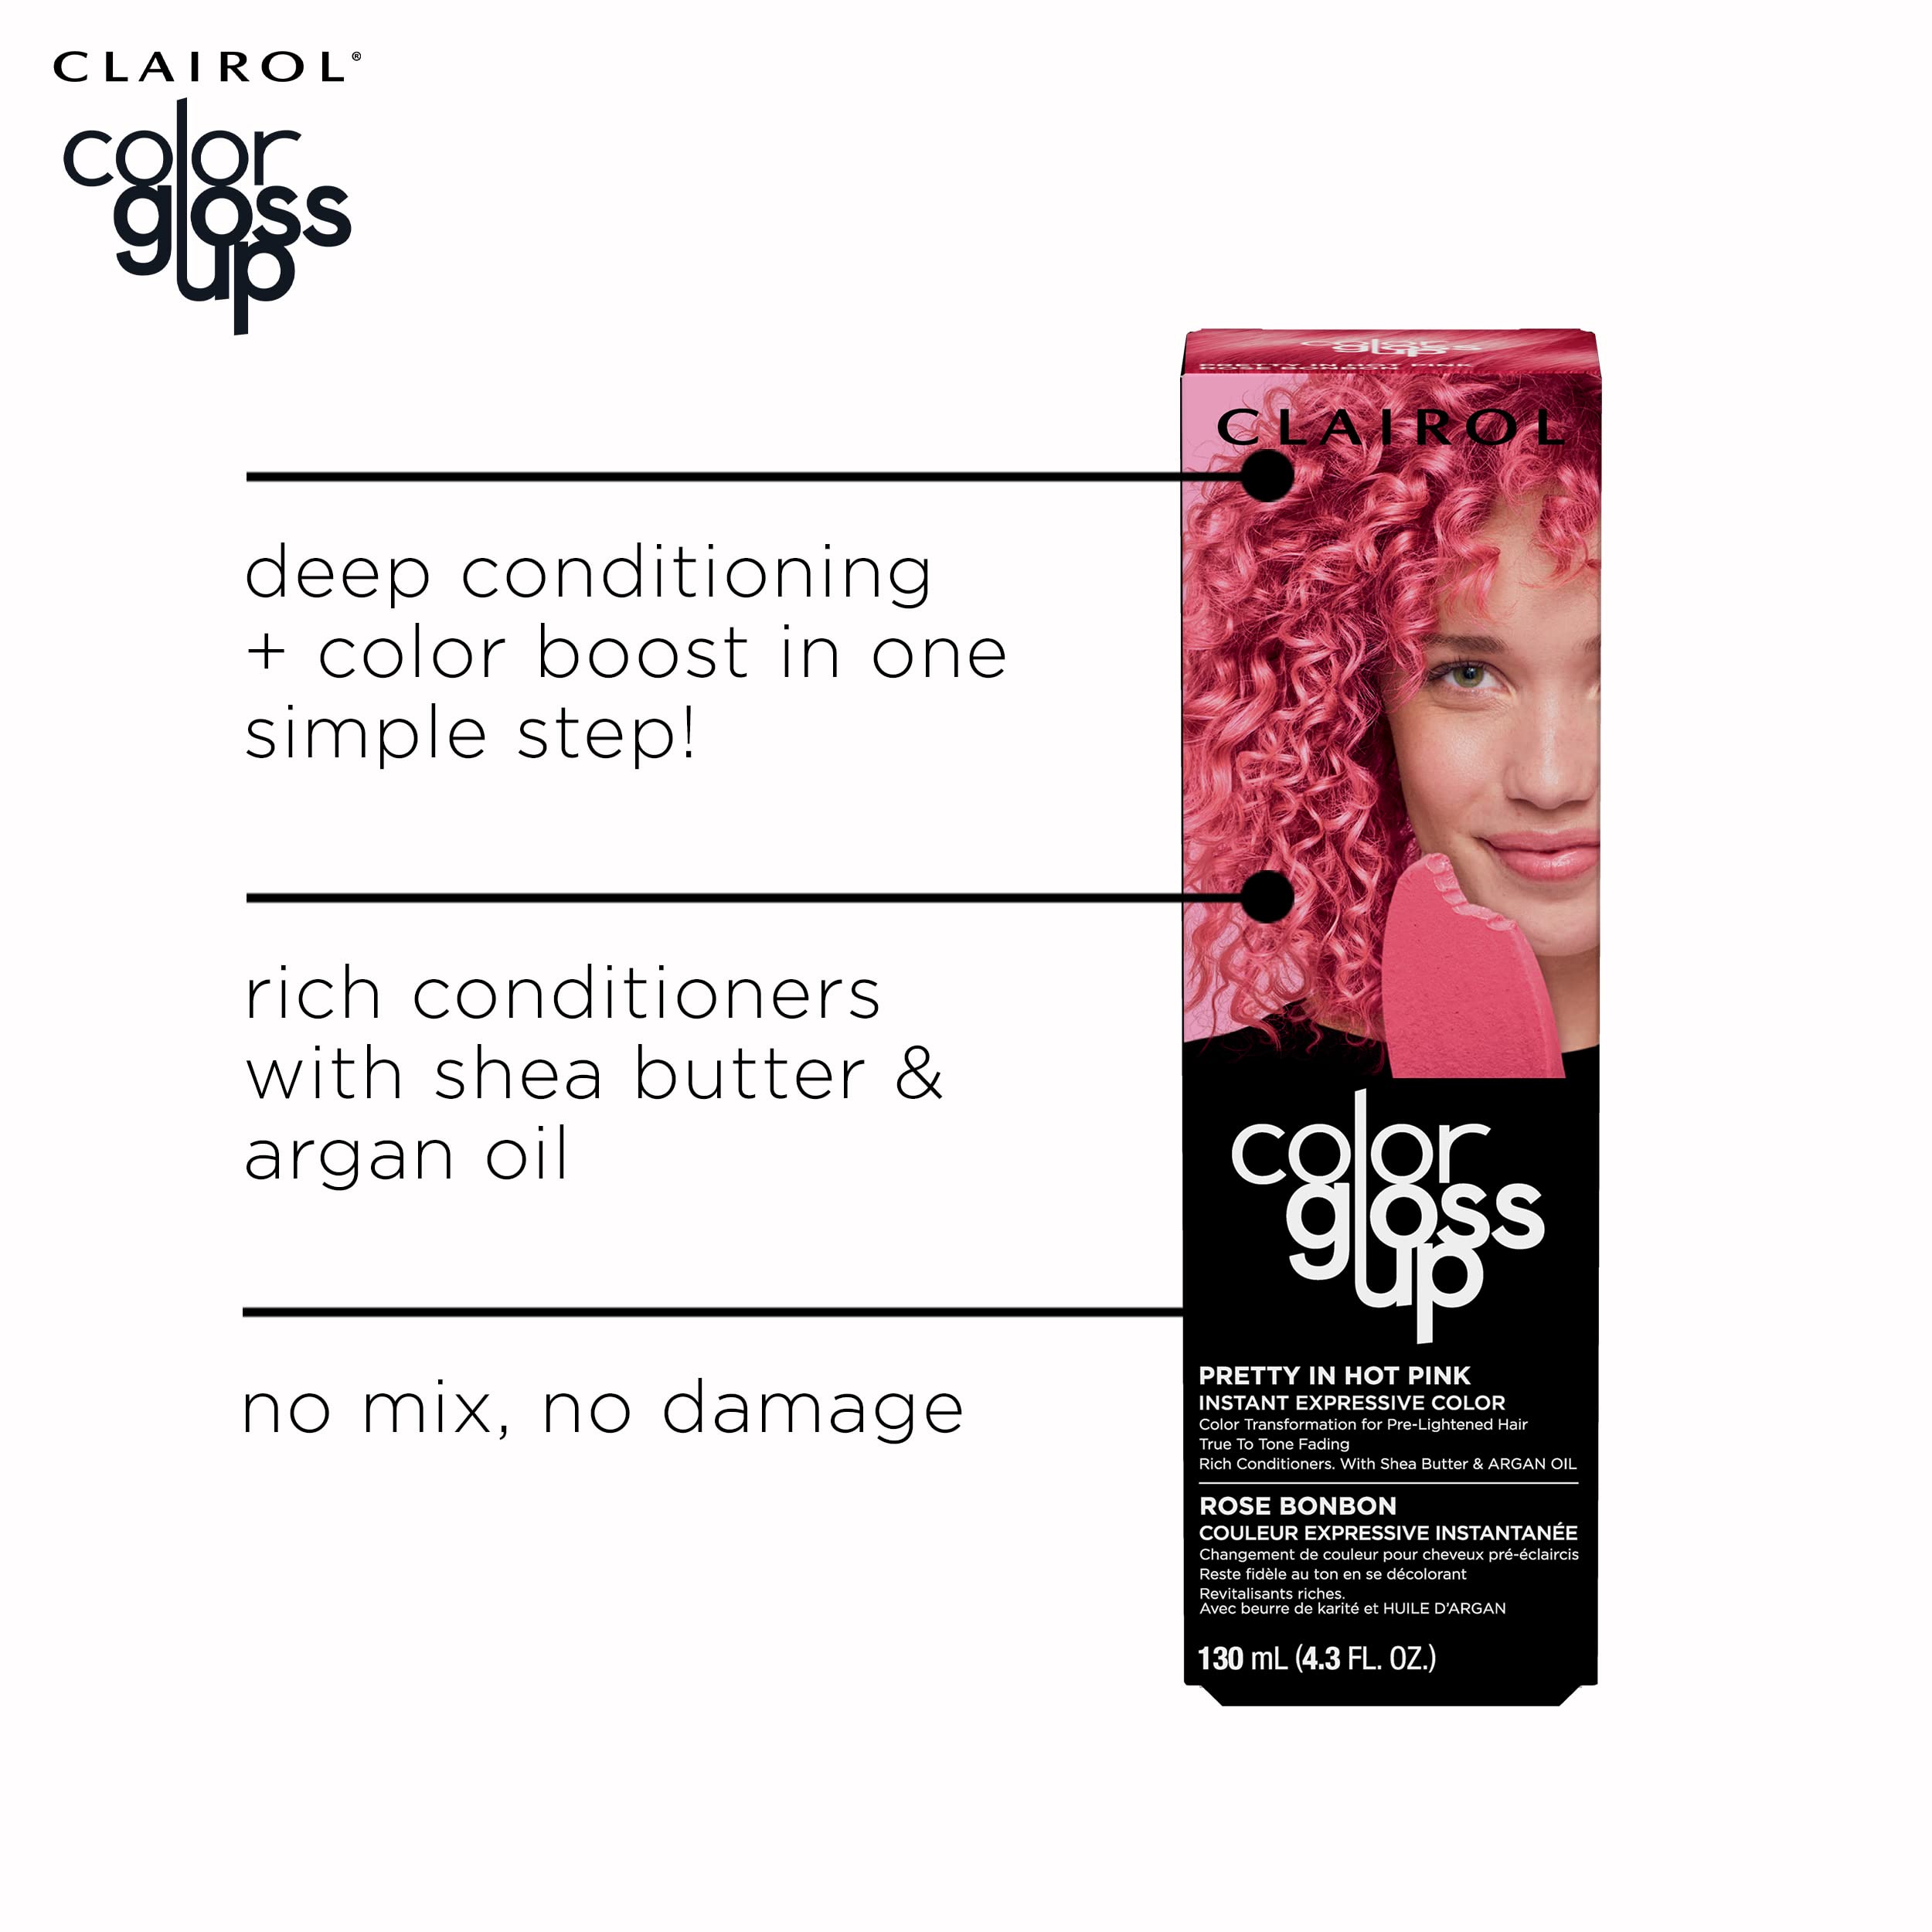 Clairol Color Gloss Up Temporary Hair Dye, Out of the Blue Hair Color, Pack of 1